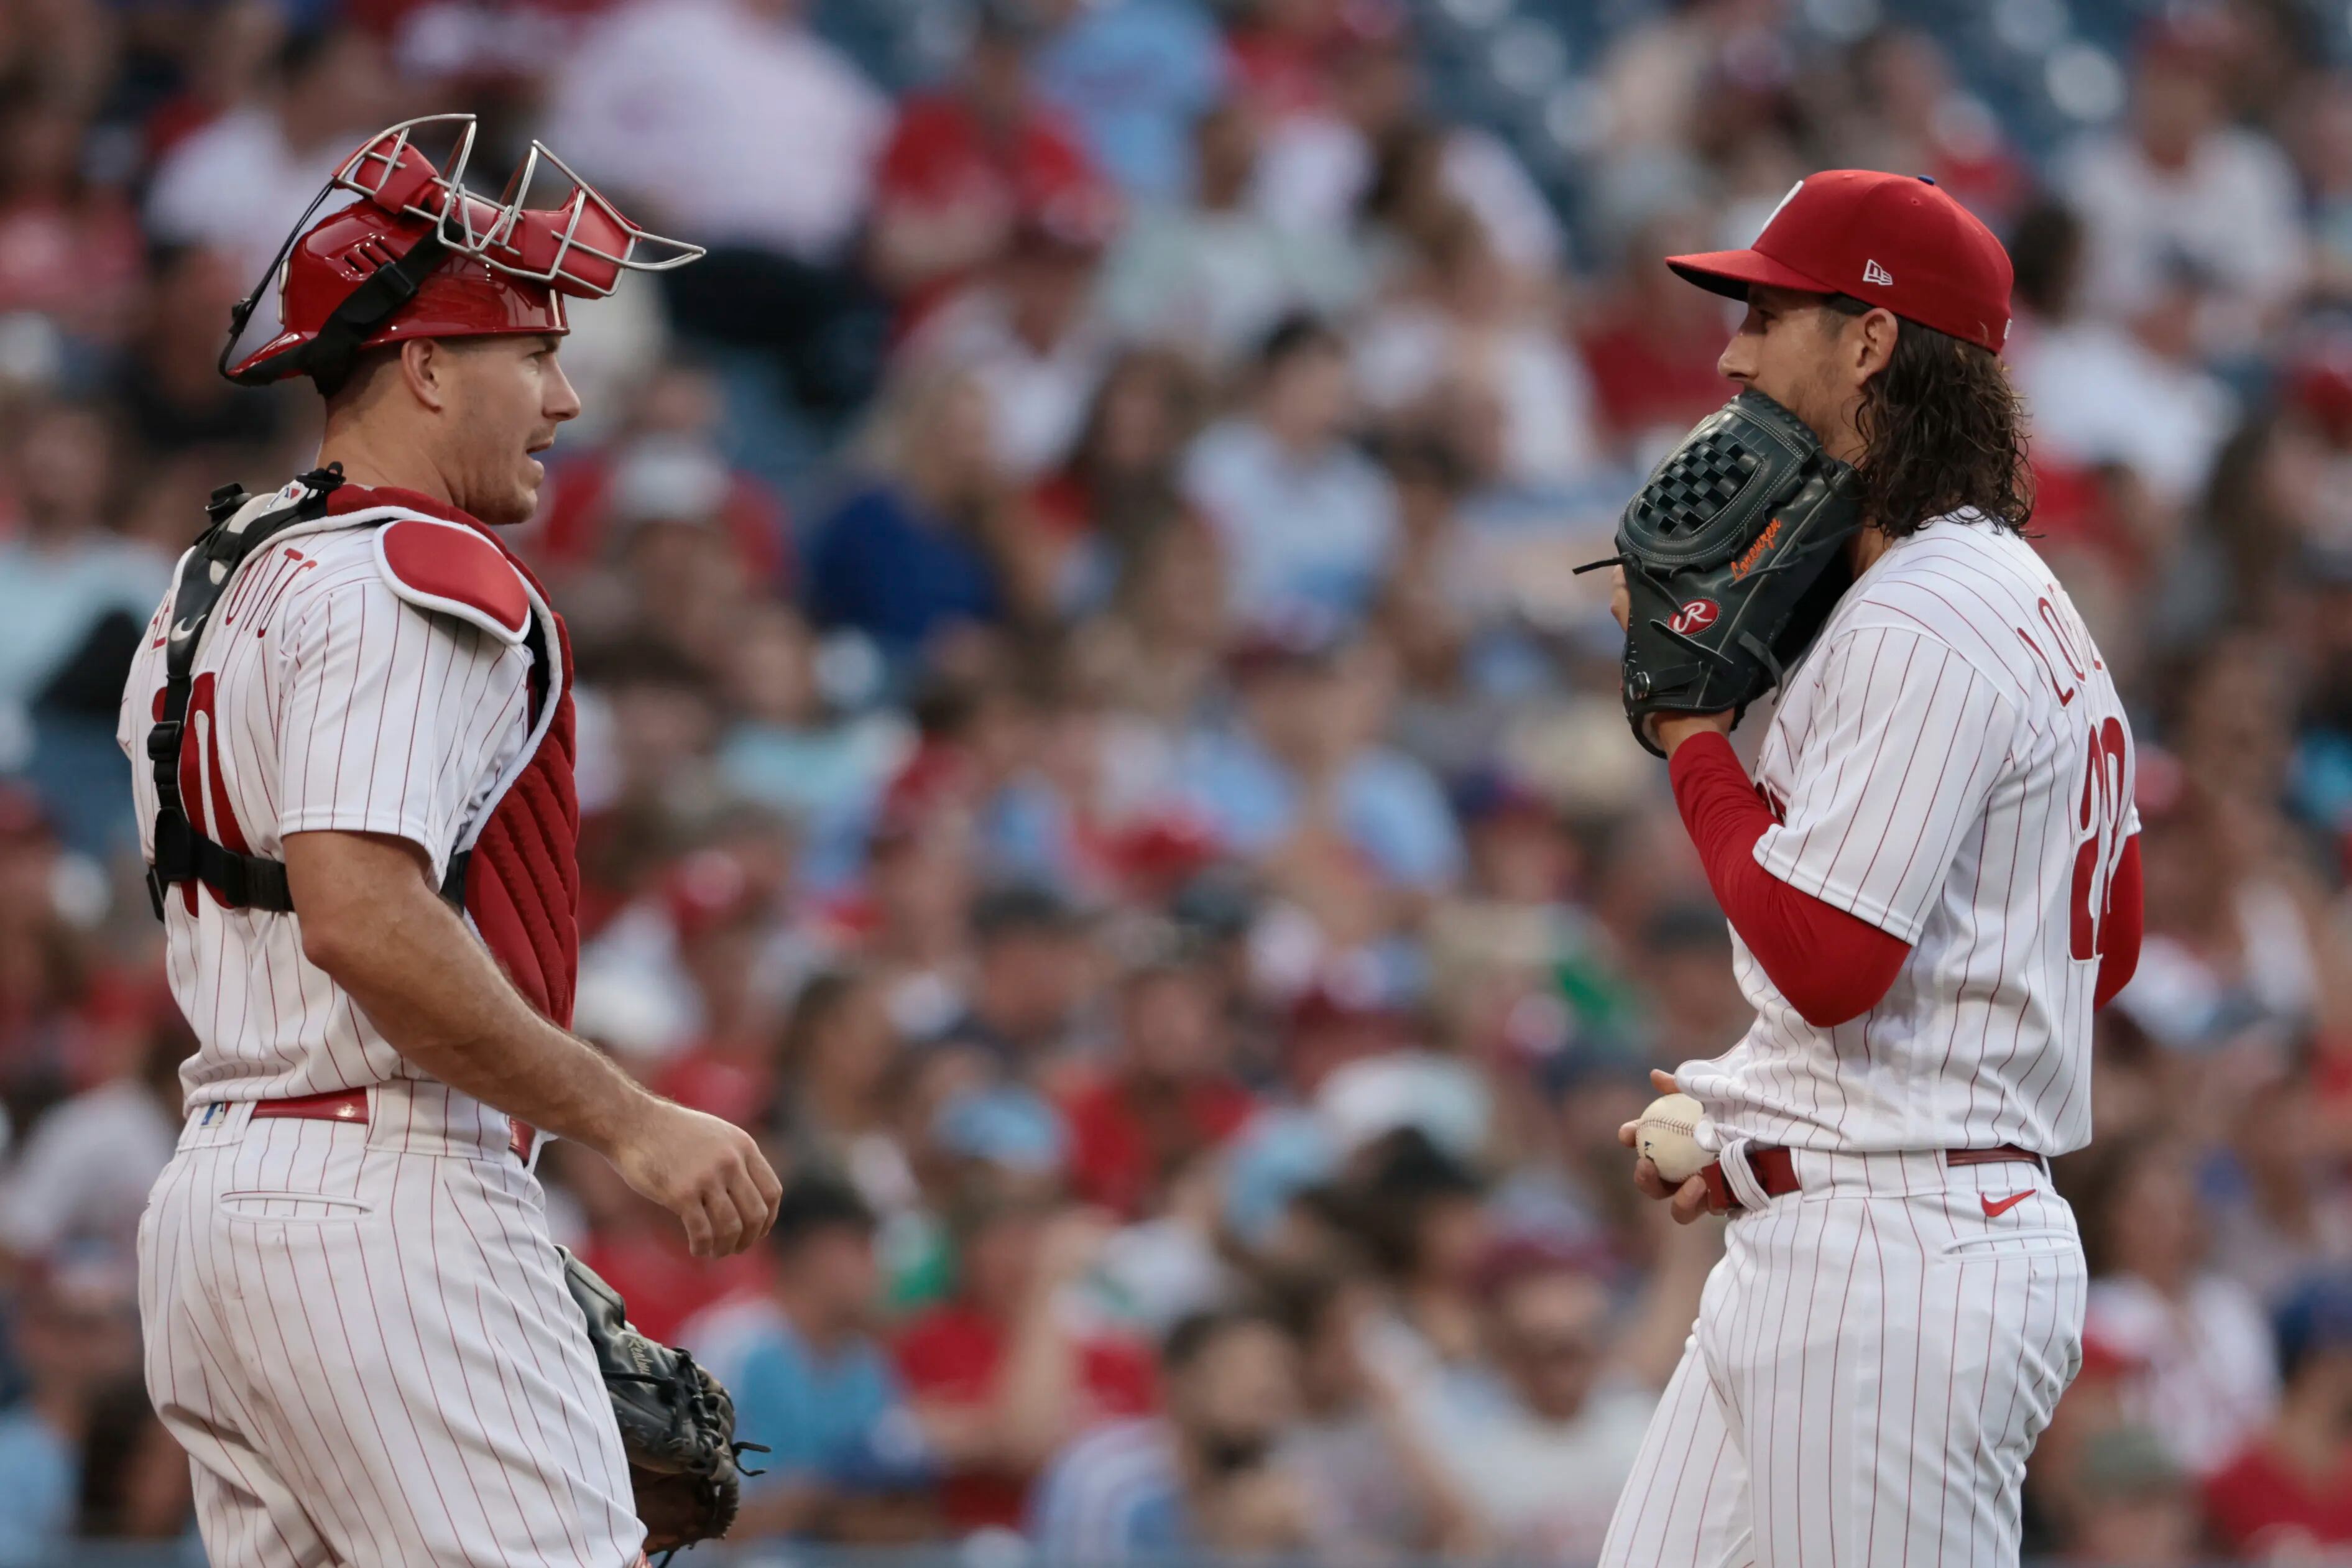 Phillies Mailbag: Realmuto's Workload, Lorenzen, and Hoskins